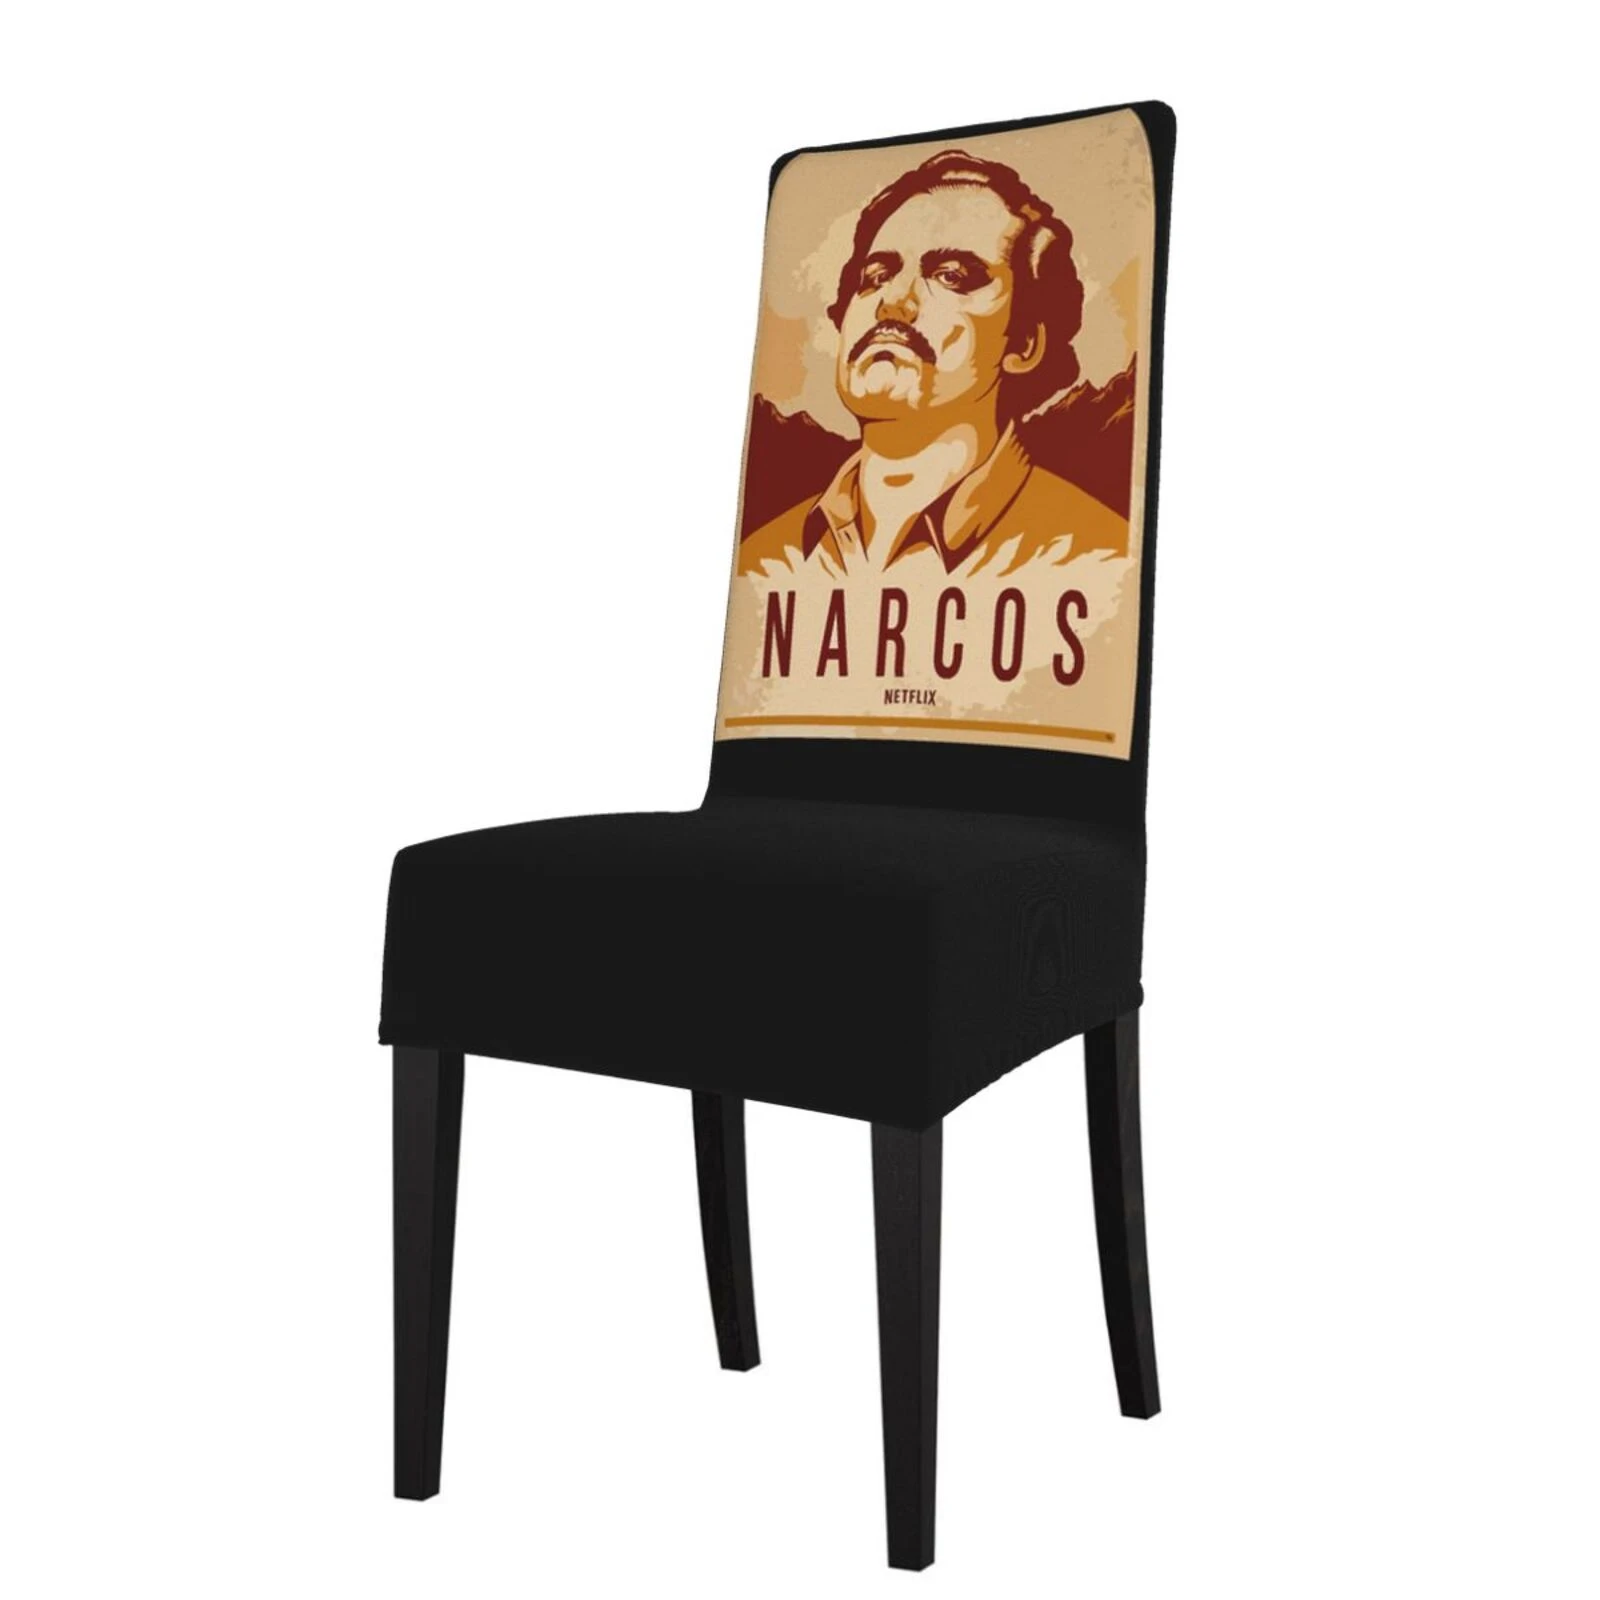 Pablo Escobar Narcos Design Home Office Dining Chair Covers Wedding  Decoration чехол на со спинкой Kitchen Cushion Funny Santa|Chair Cover| -  AliExpress